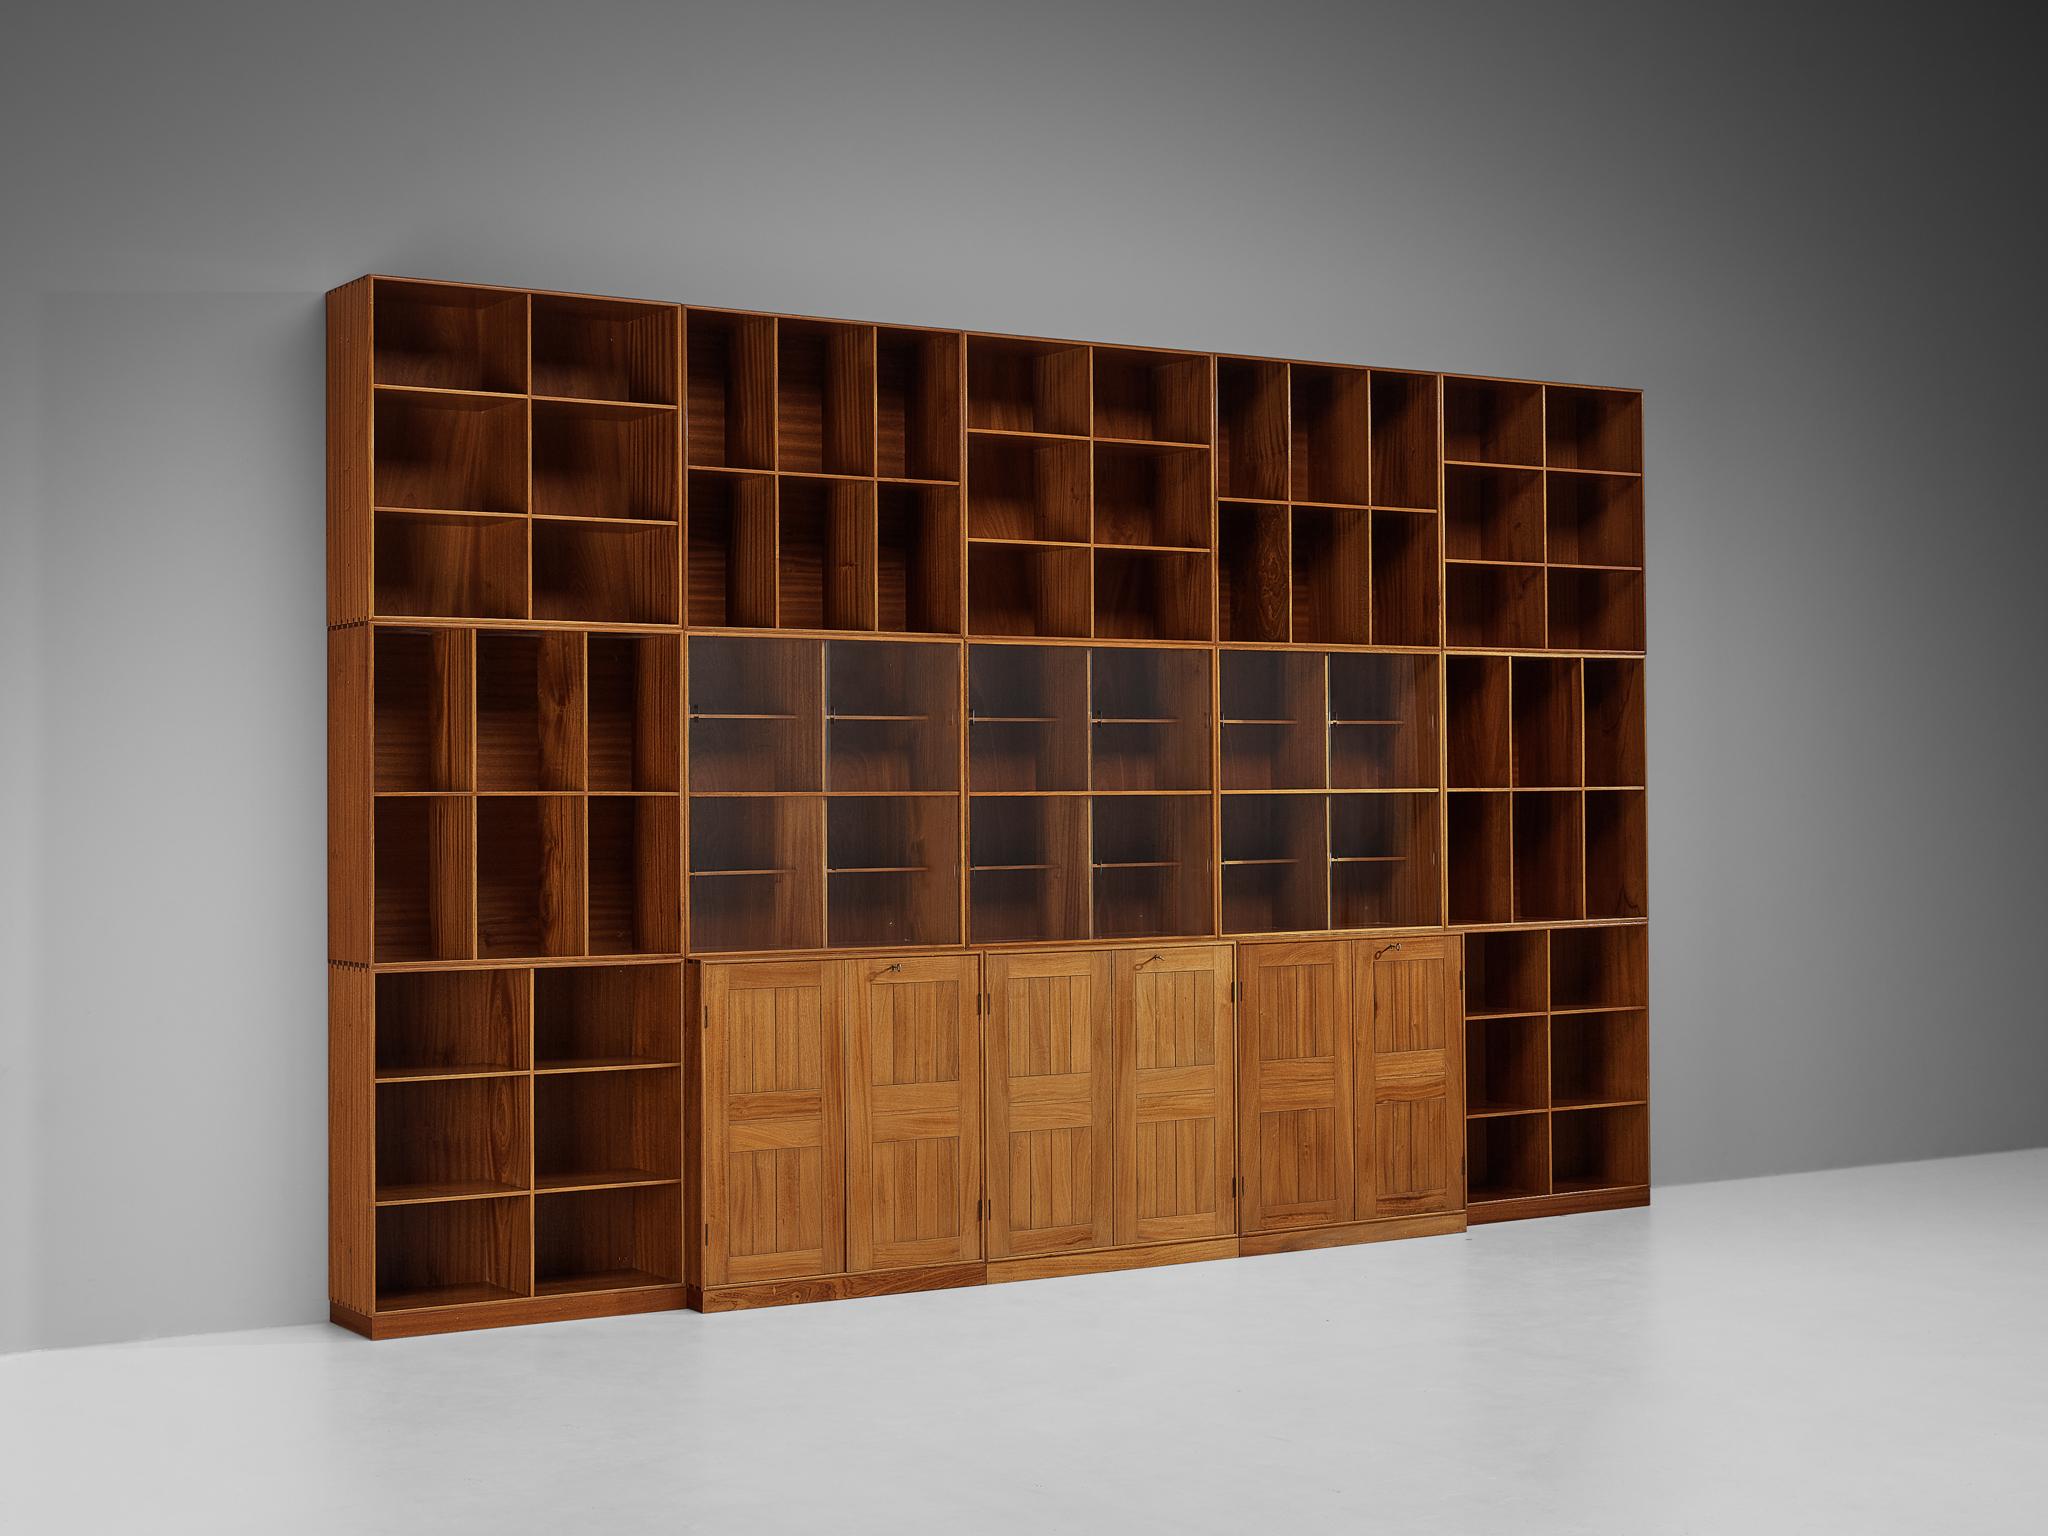 Mogens Koch for Rud Rasmussen, modular book case or library, mahogany, Denmark, 1950s

Intriguing and sizable modular library by Danish designer Mogens Koch. This piece is build from twentyfive modular parts to form this great wall unit or library.